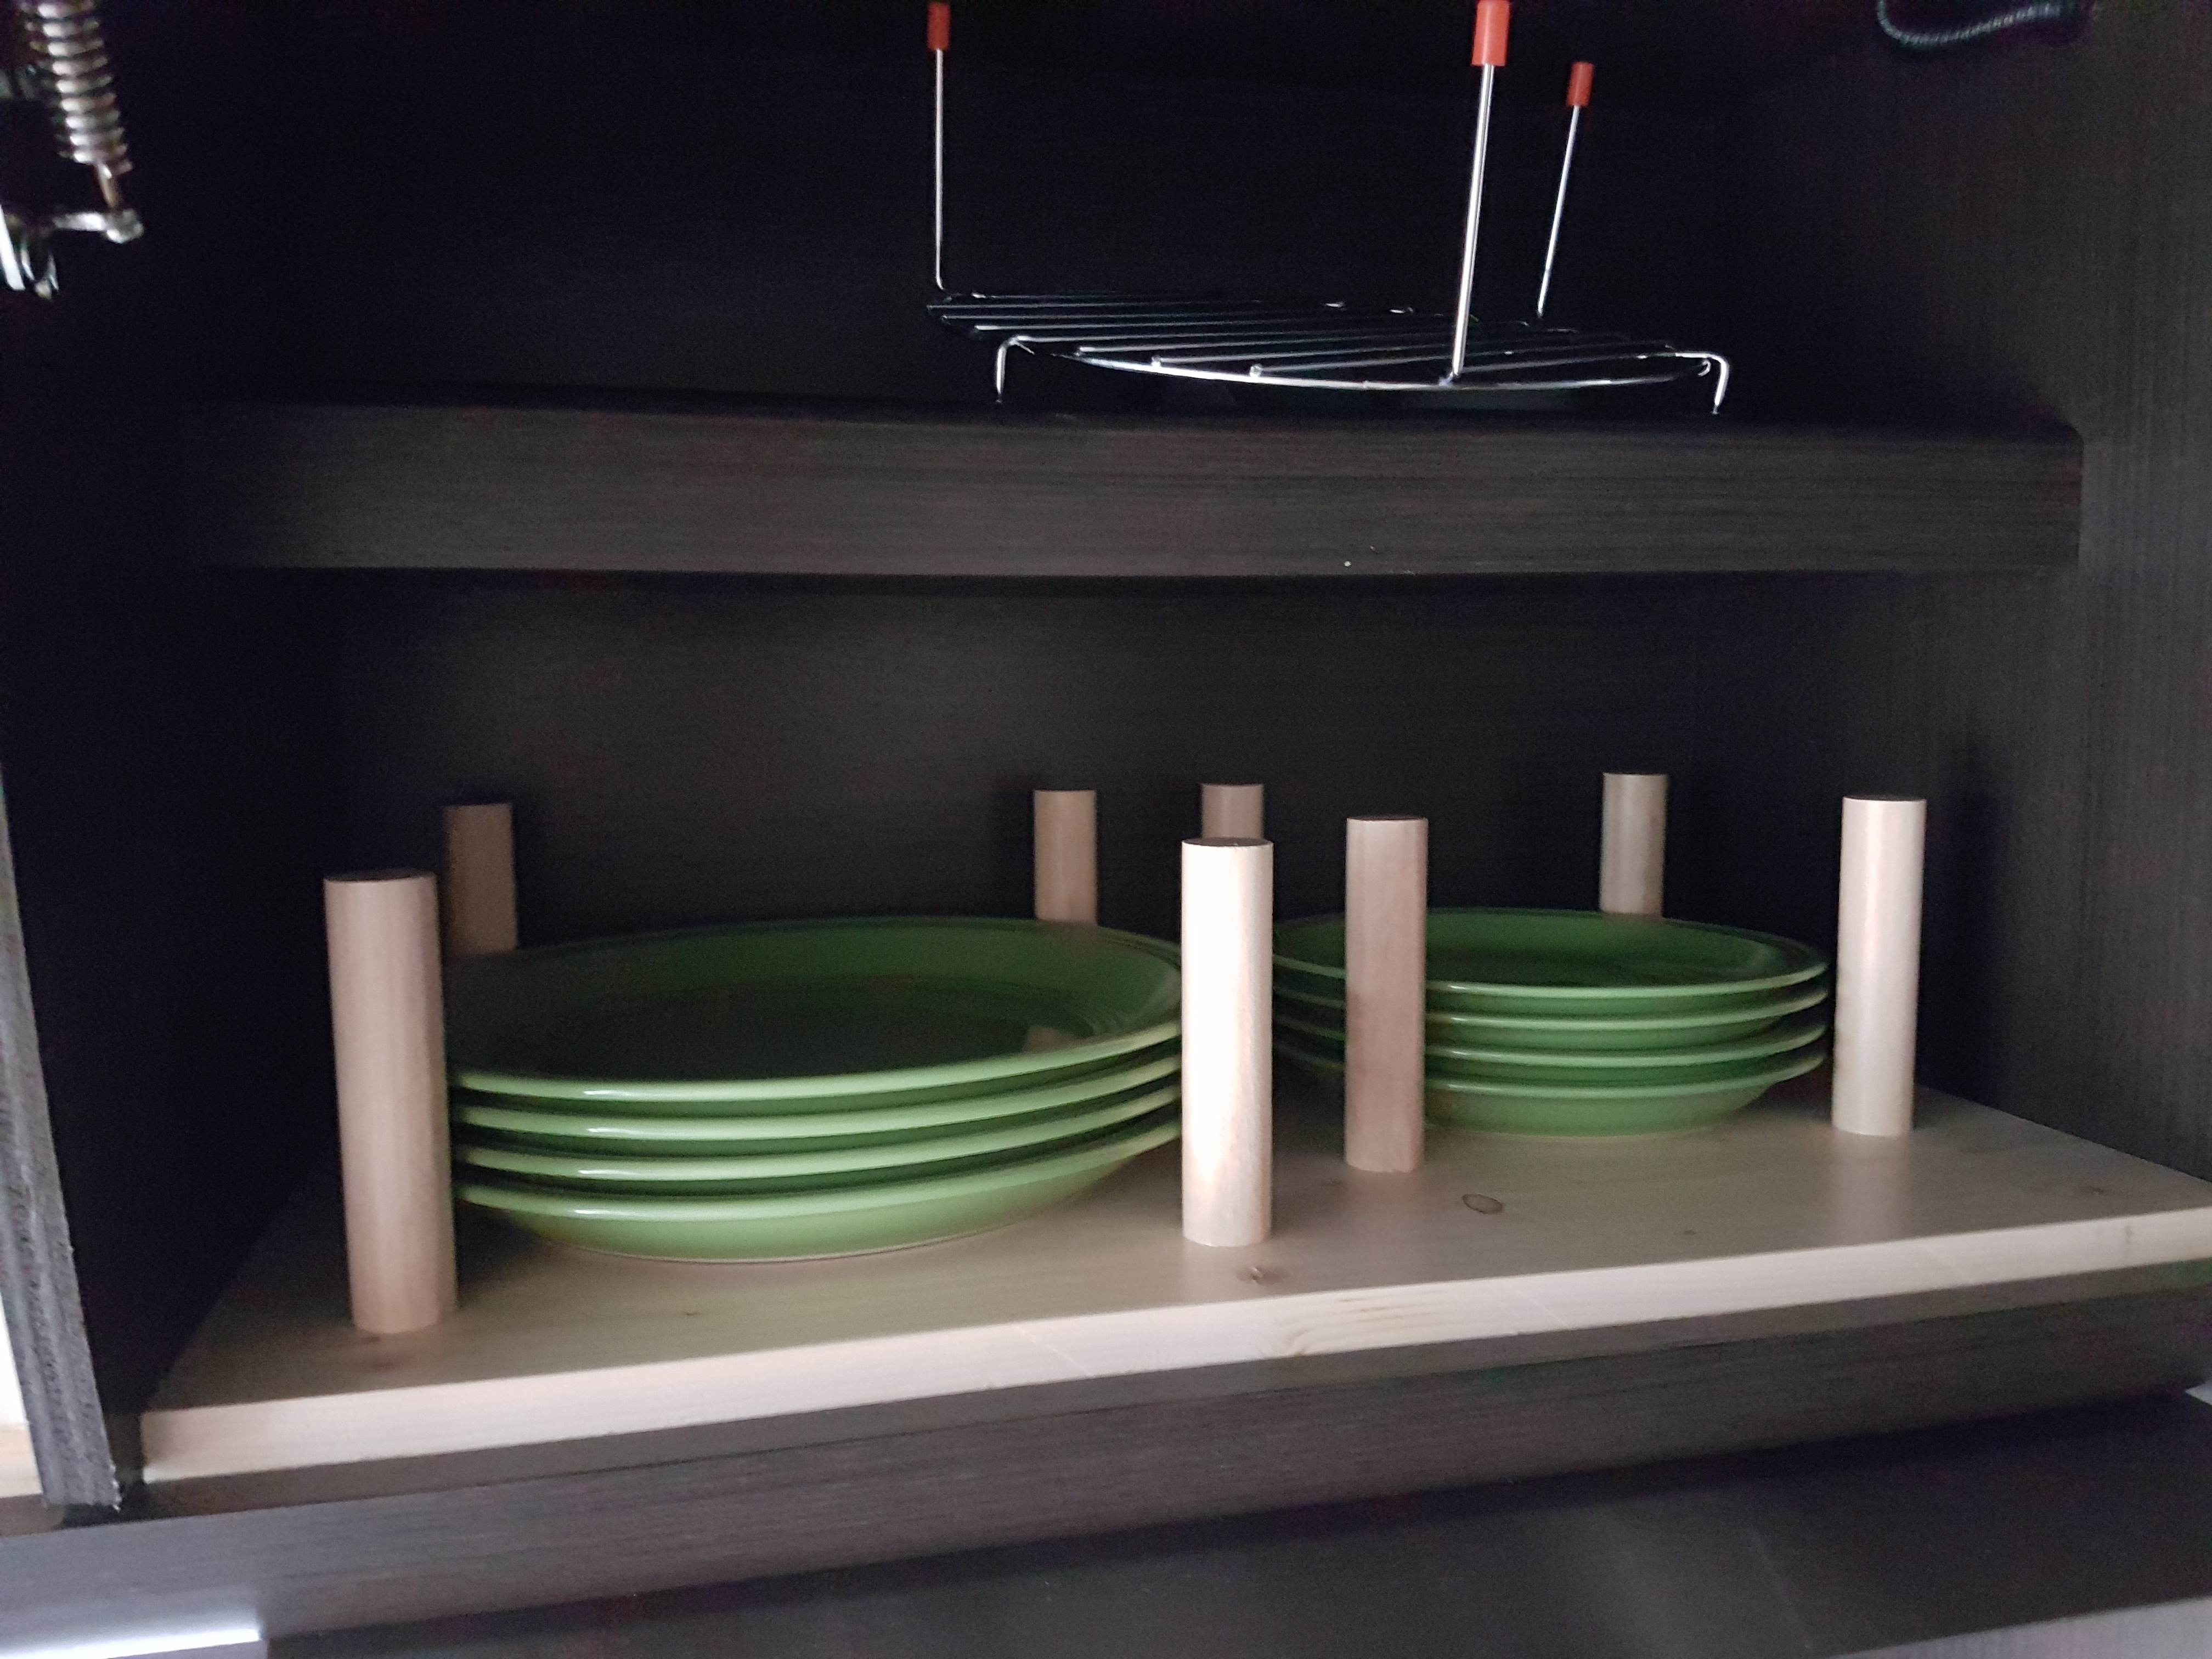 Plate and spice holders for our Thor Gemini 23tr